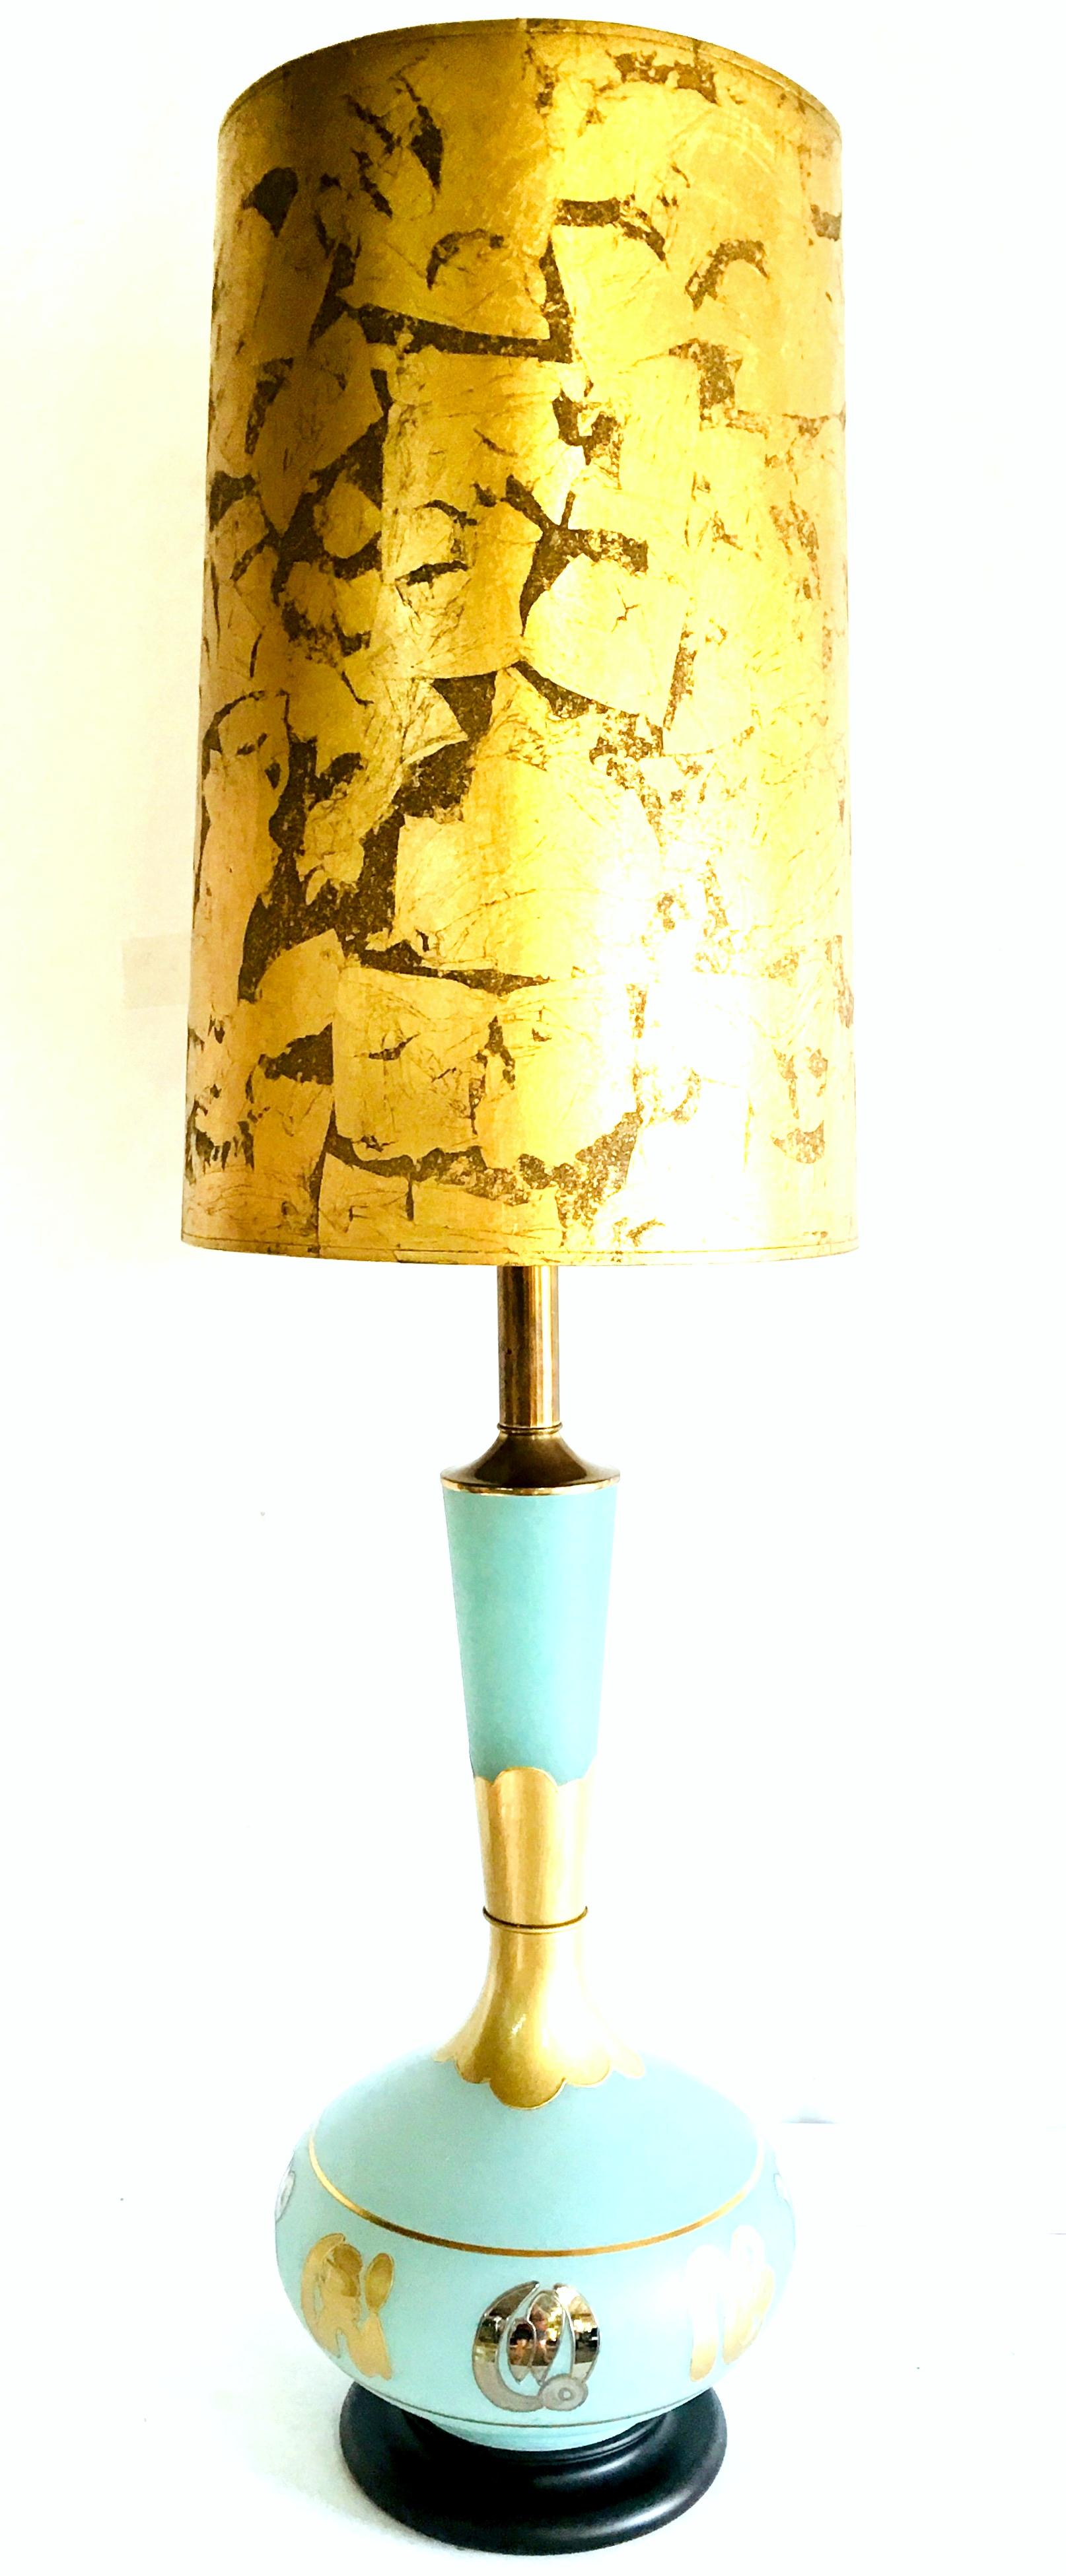 Mid-20th Century monumental hand blown glass, frosted sea foam green with silver and gold gilt Arabesque style table lamp. This sea foam green frosted art glass lamp features hang painted applied silver and gold gilt arabesque symbol motifs. The